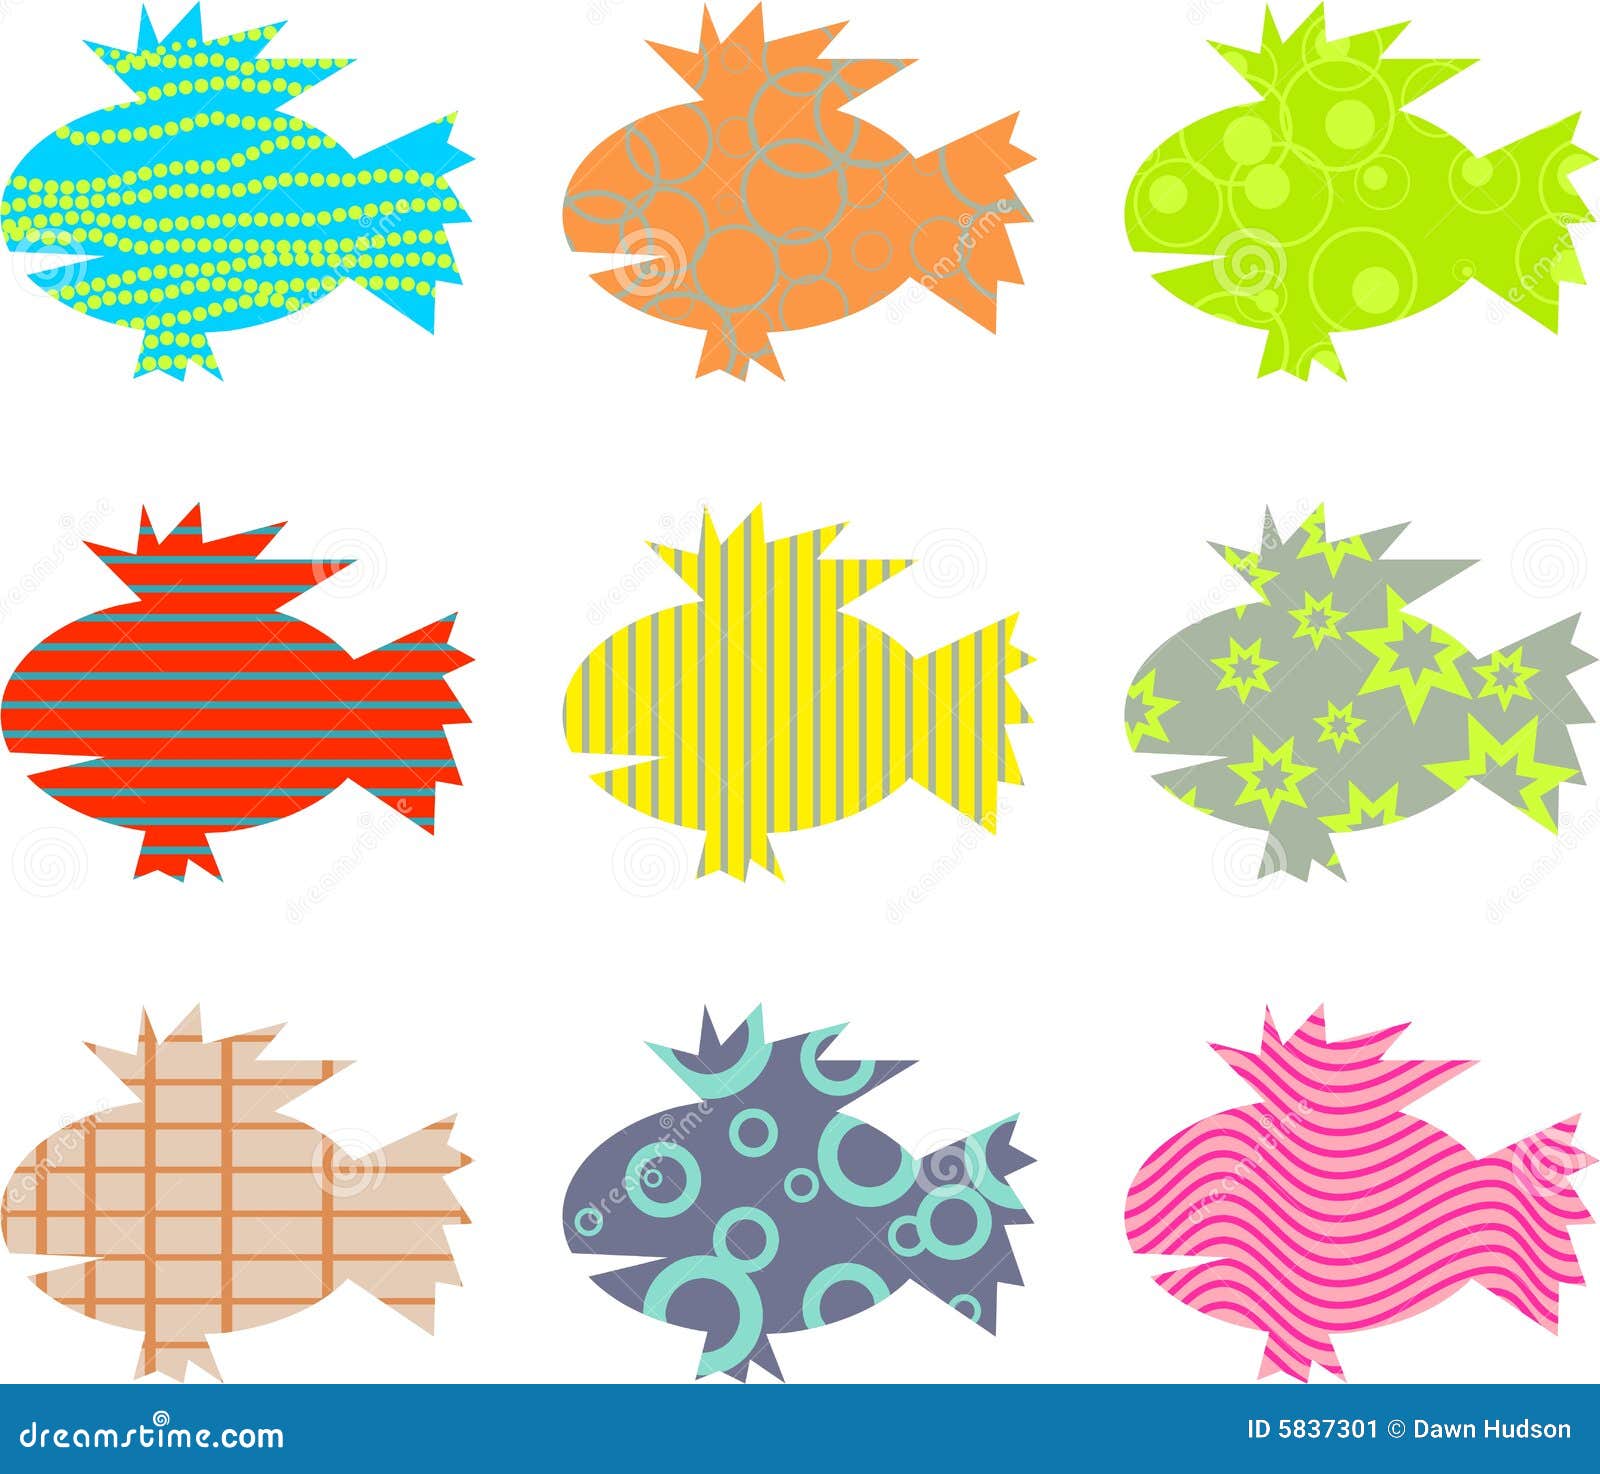 Artistic abstract patterned fish wallpaper background design